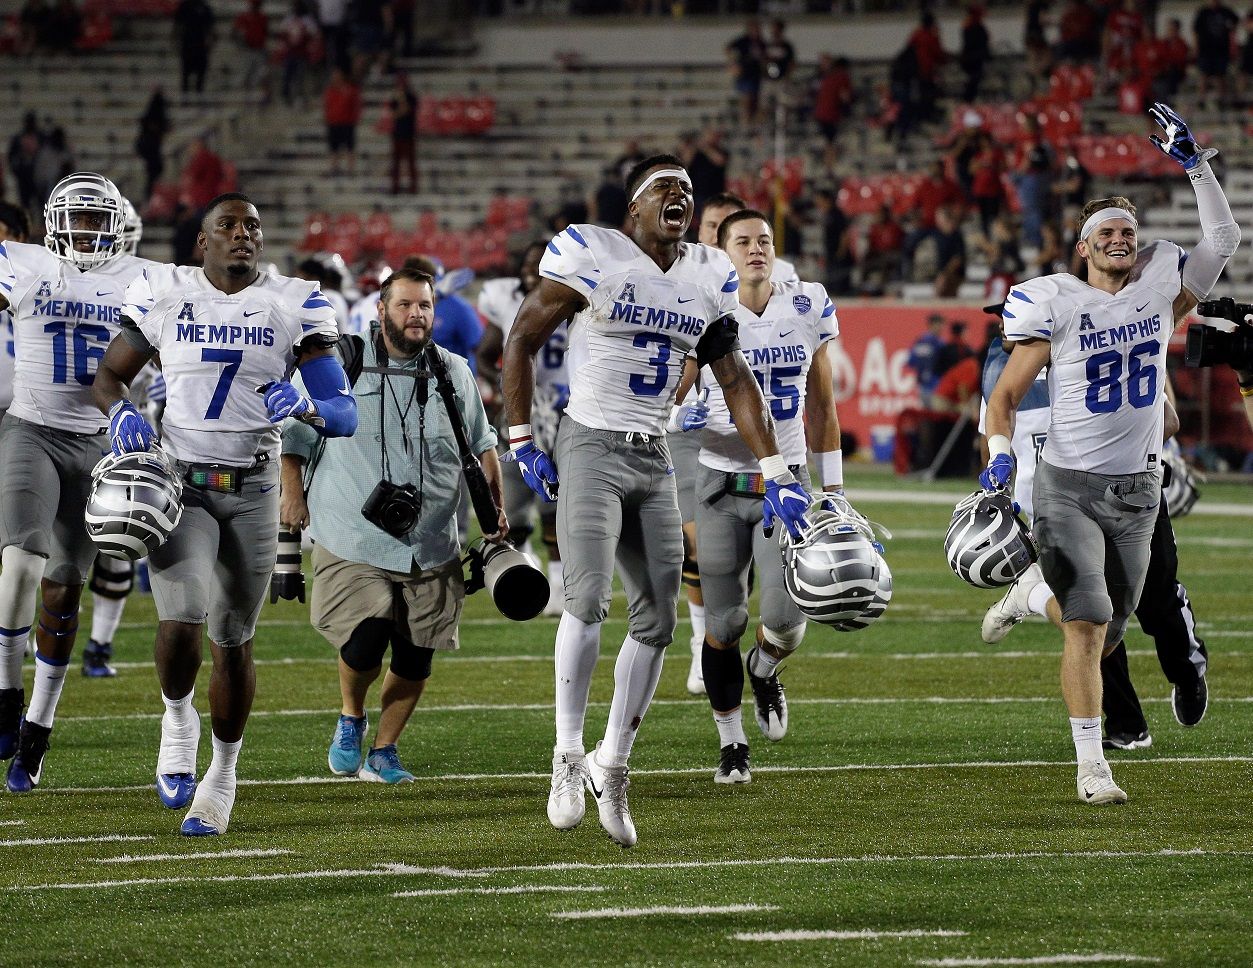 HOUSTON, TX - OCTOBER 19:  Anthony Miller #3 of the Memphis Tigers celebrates with Joey Magnifico #86 and Curtis Akins #7 after a comeback win ovewr the Houston Cougars 42-38 on October 19, 2017 in Houston, Texas.  (Photo by Bob Levey/Getty Images)